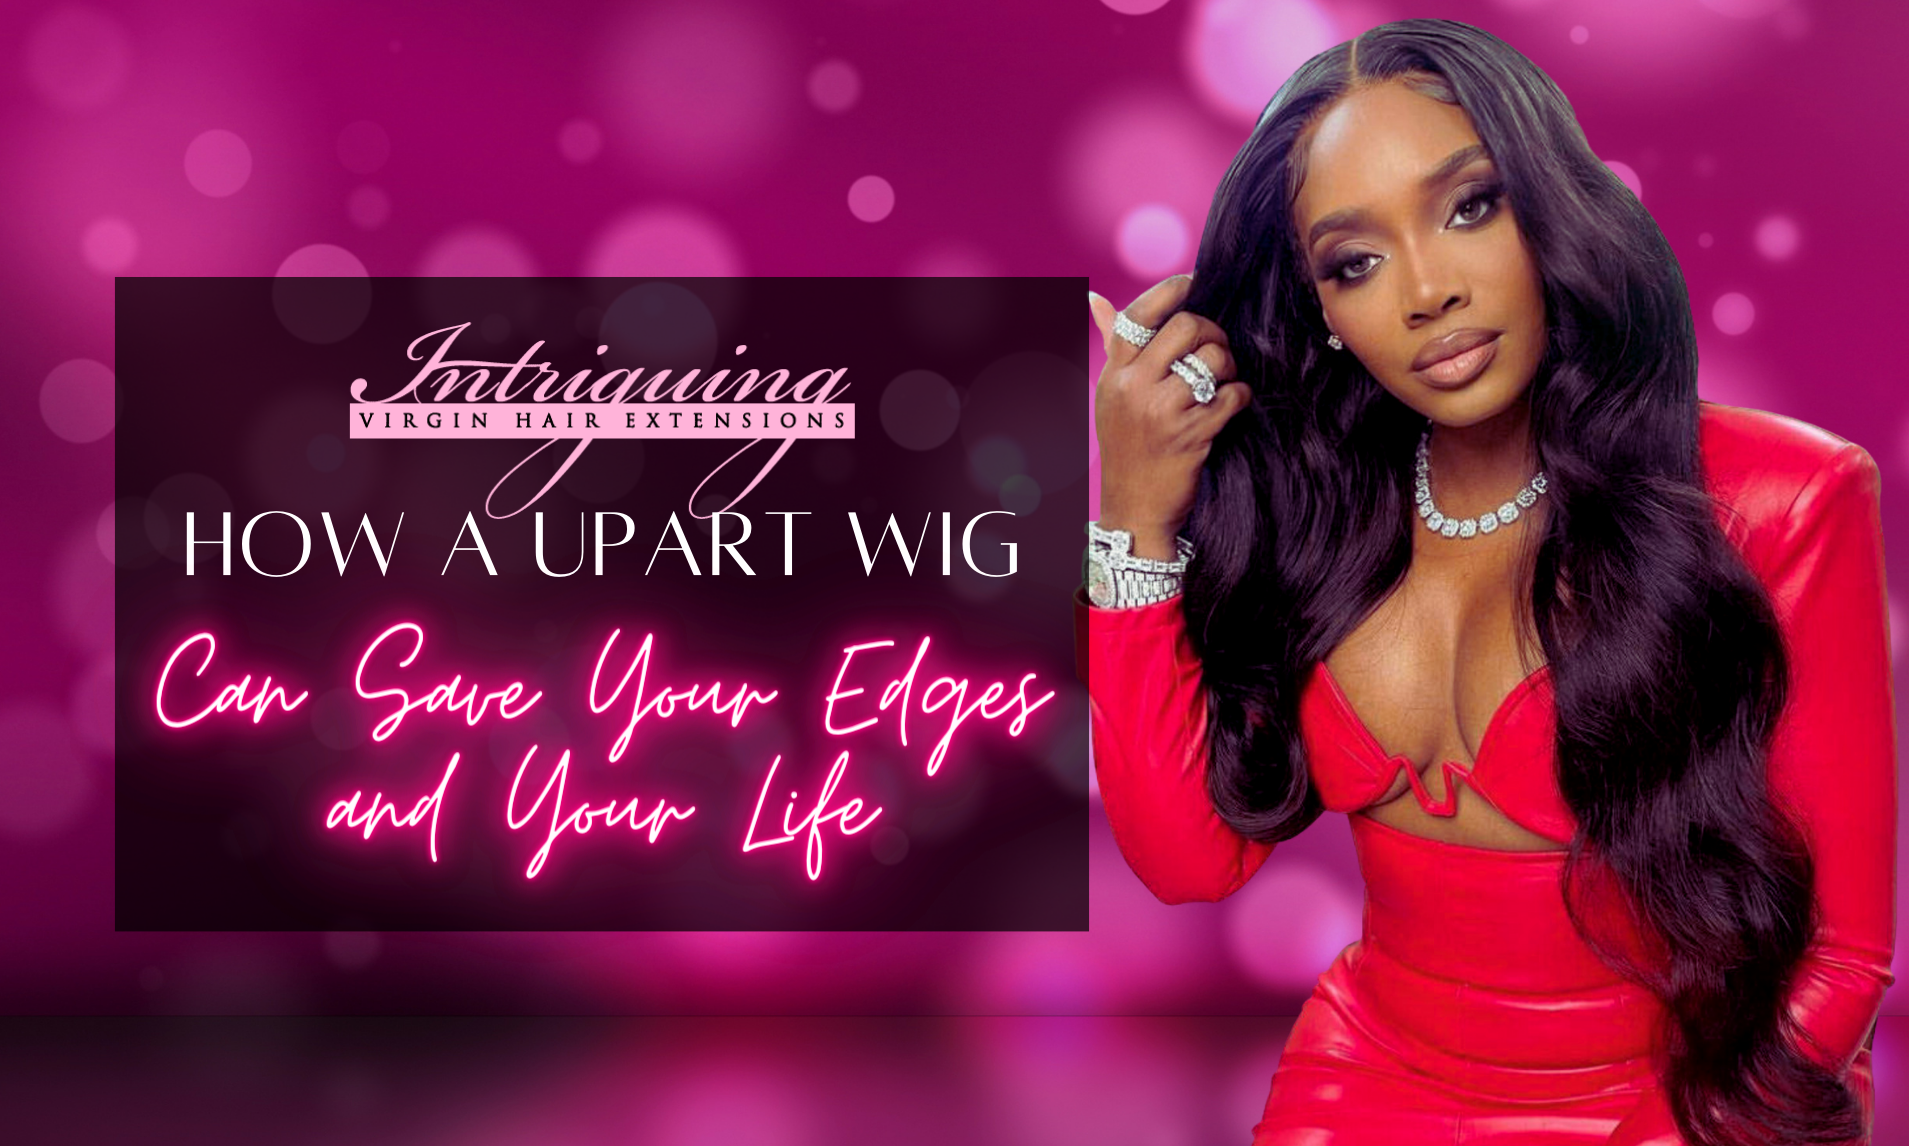 HOW A UPART WIG CAN SAVE YOUR EDGES AND YOUR LIFE